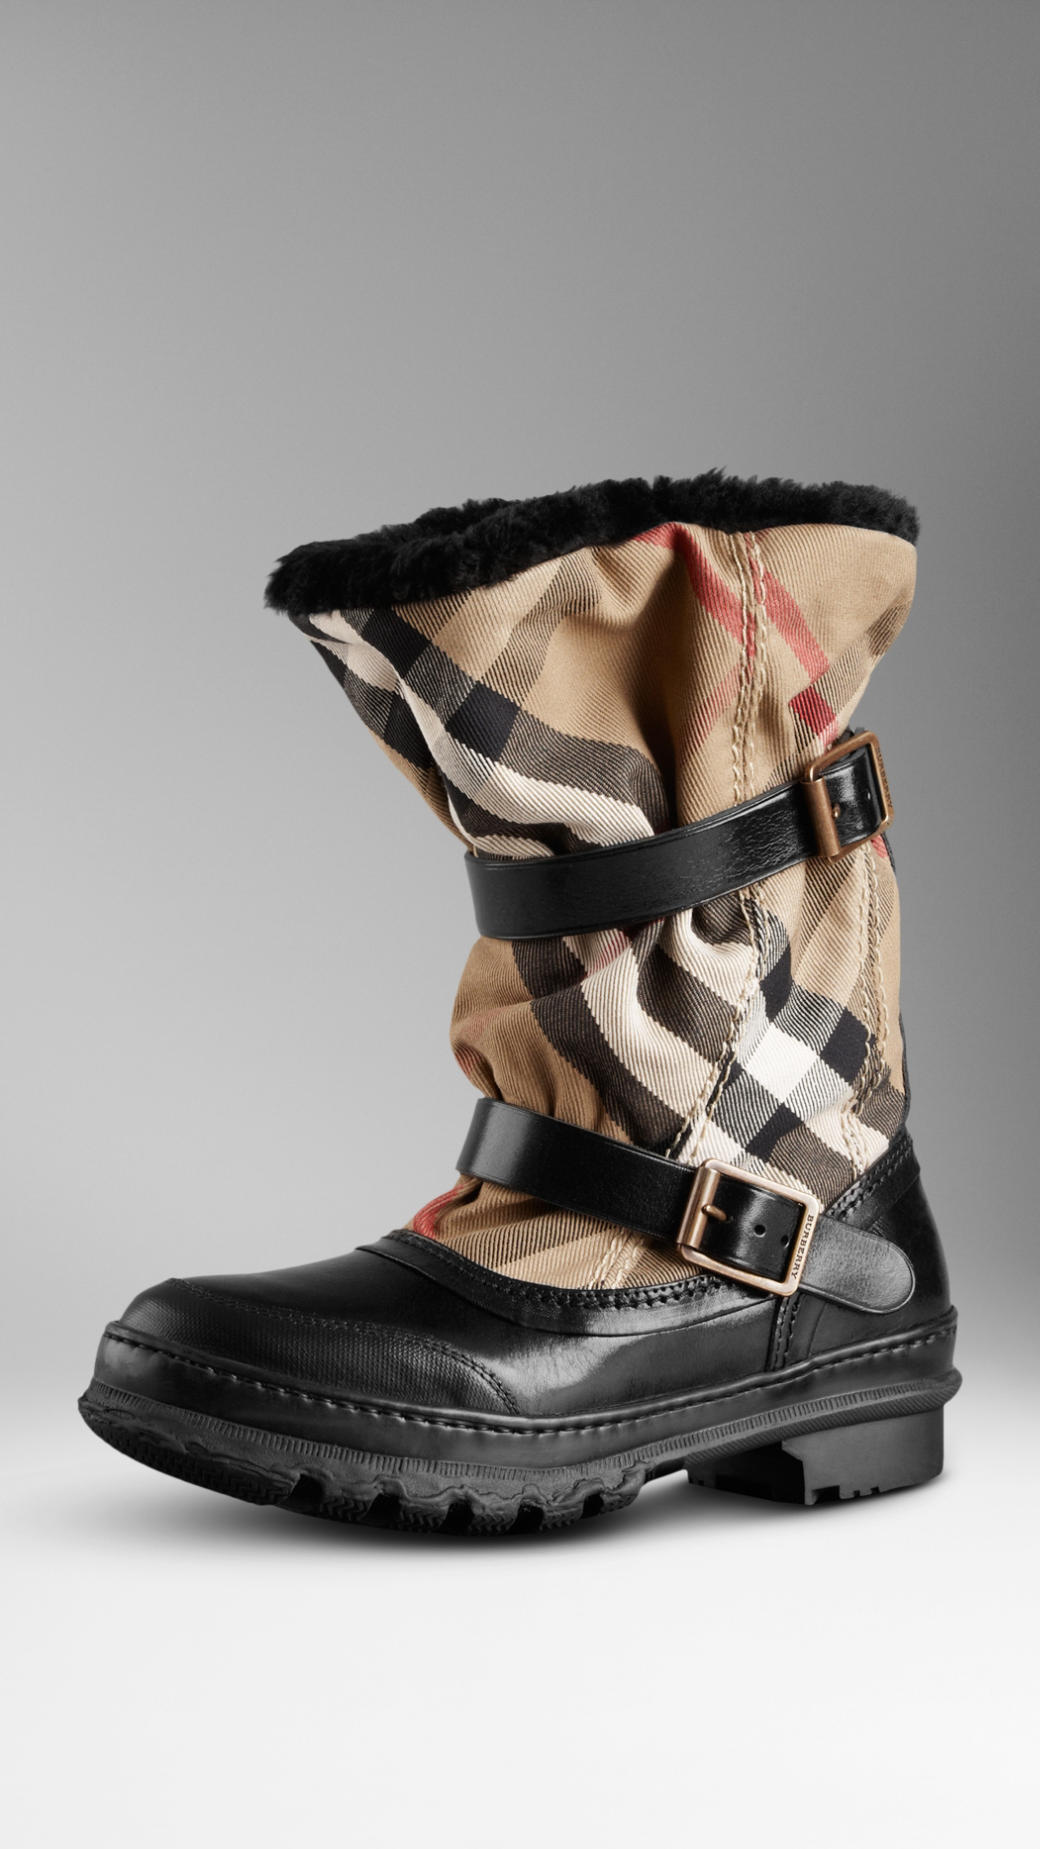 Winter Warmth: The Cozy Comfort of Burberry Fleece Lined Boots